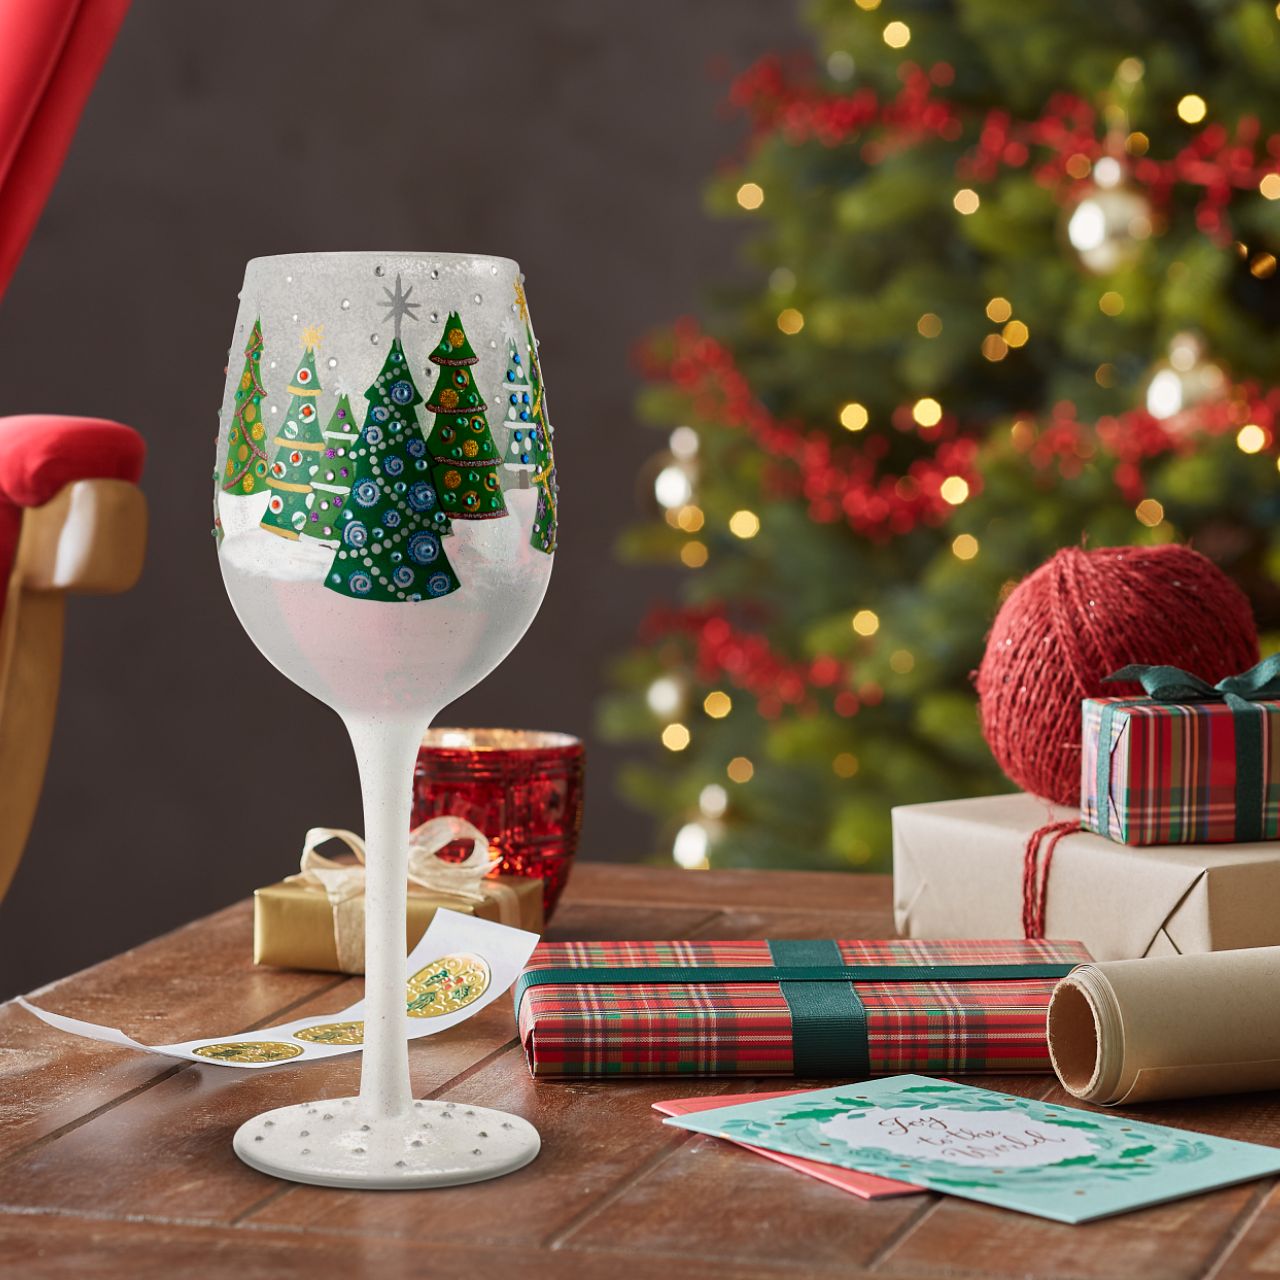 Christmas Trees in the Snow Wine Glass by Lolita  Christmas pines covered in lights and ornaments cover this winter wonderland wine glass. With textured snow and glittering accents, this wine glass is ready for wassail and snowflakes.